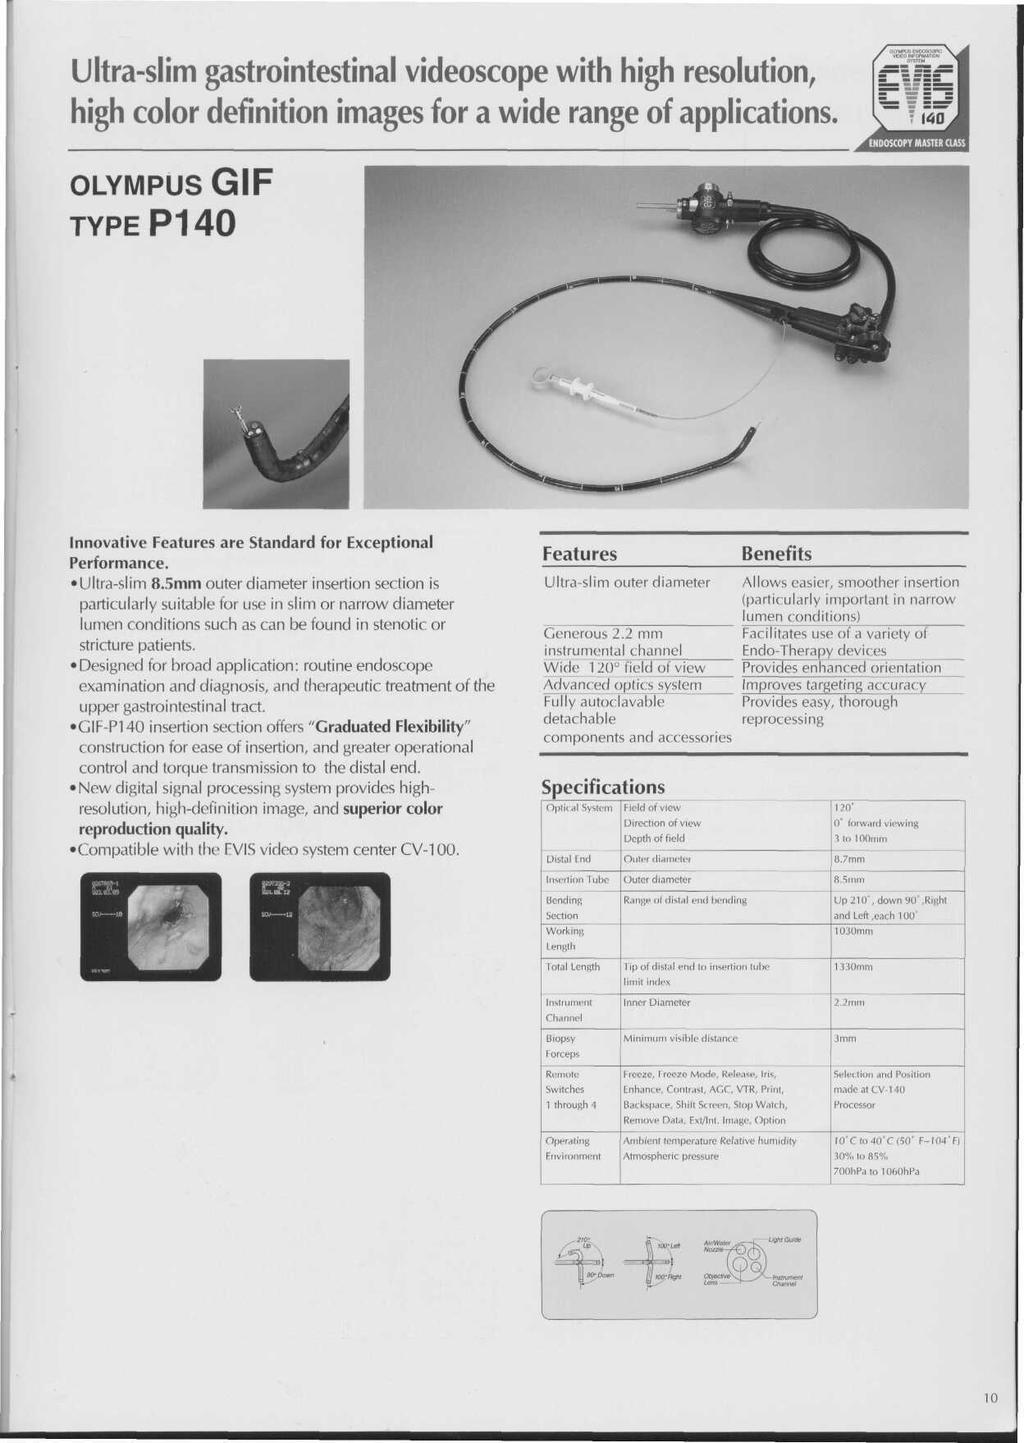 Ultraslim gastrointestinal videoscope with high resolution, high color definition images for a wide range of applications.